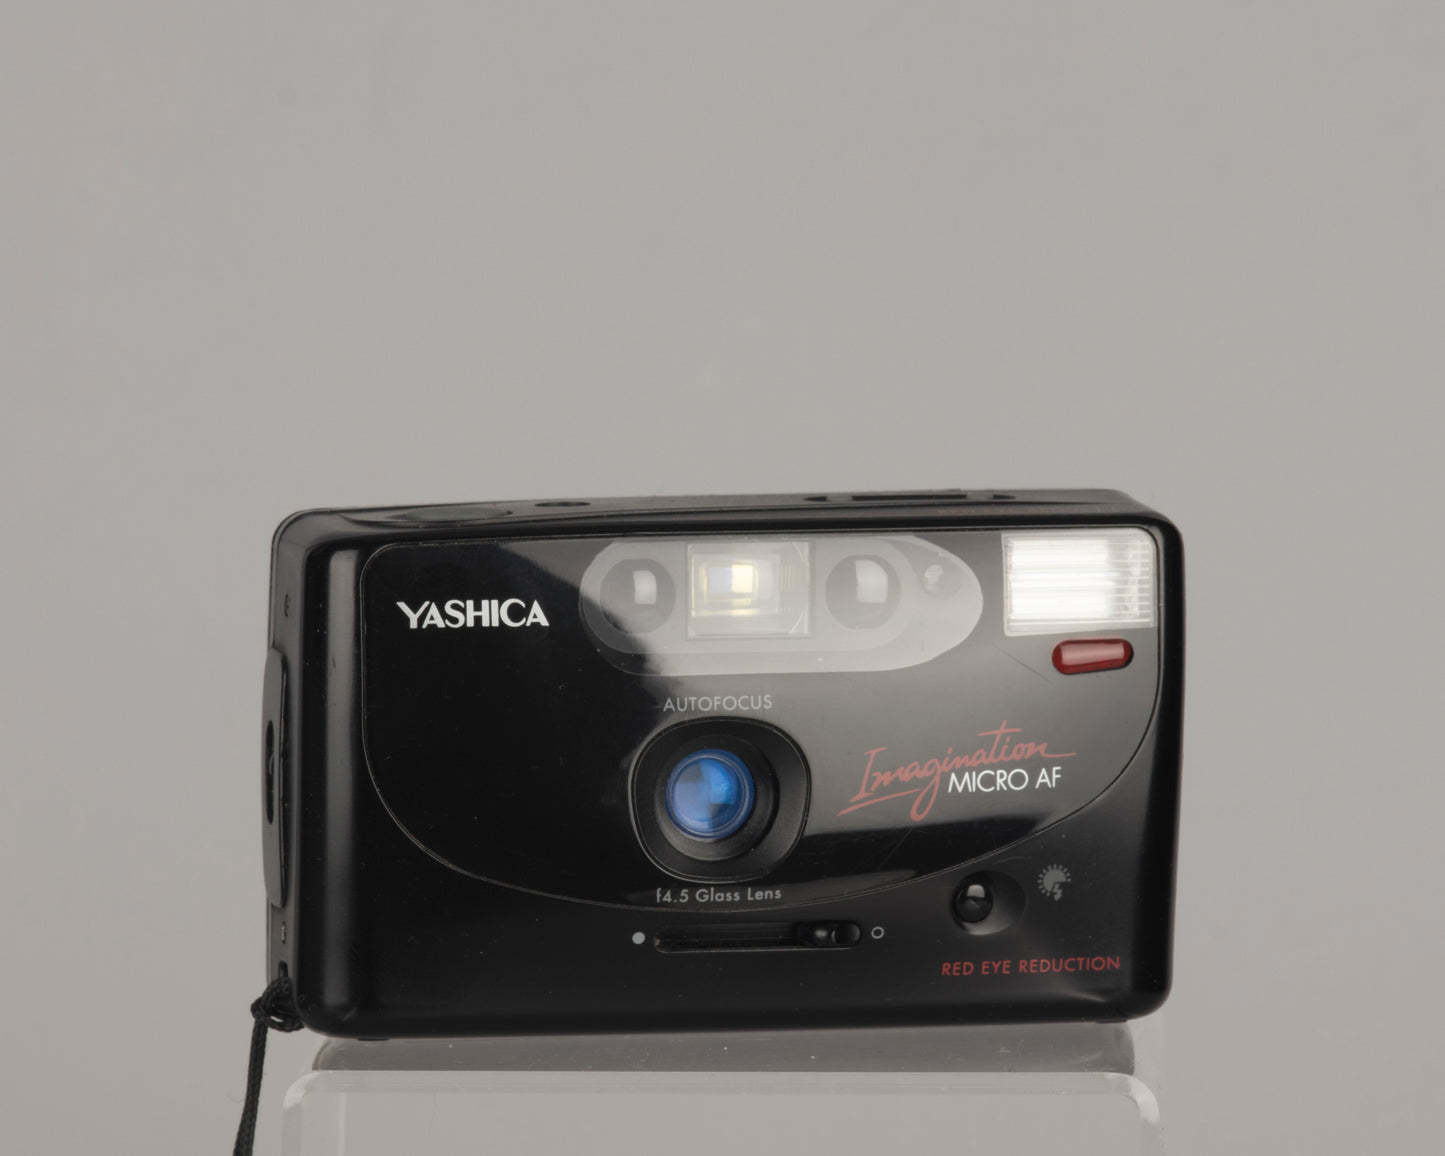 The Yashica Imagination Micro AF is a very compact 35mm point-and-shoot with the 35mm f4.5 lens